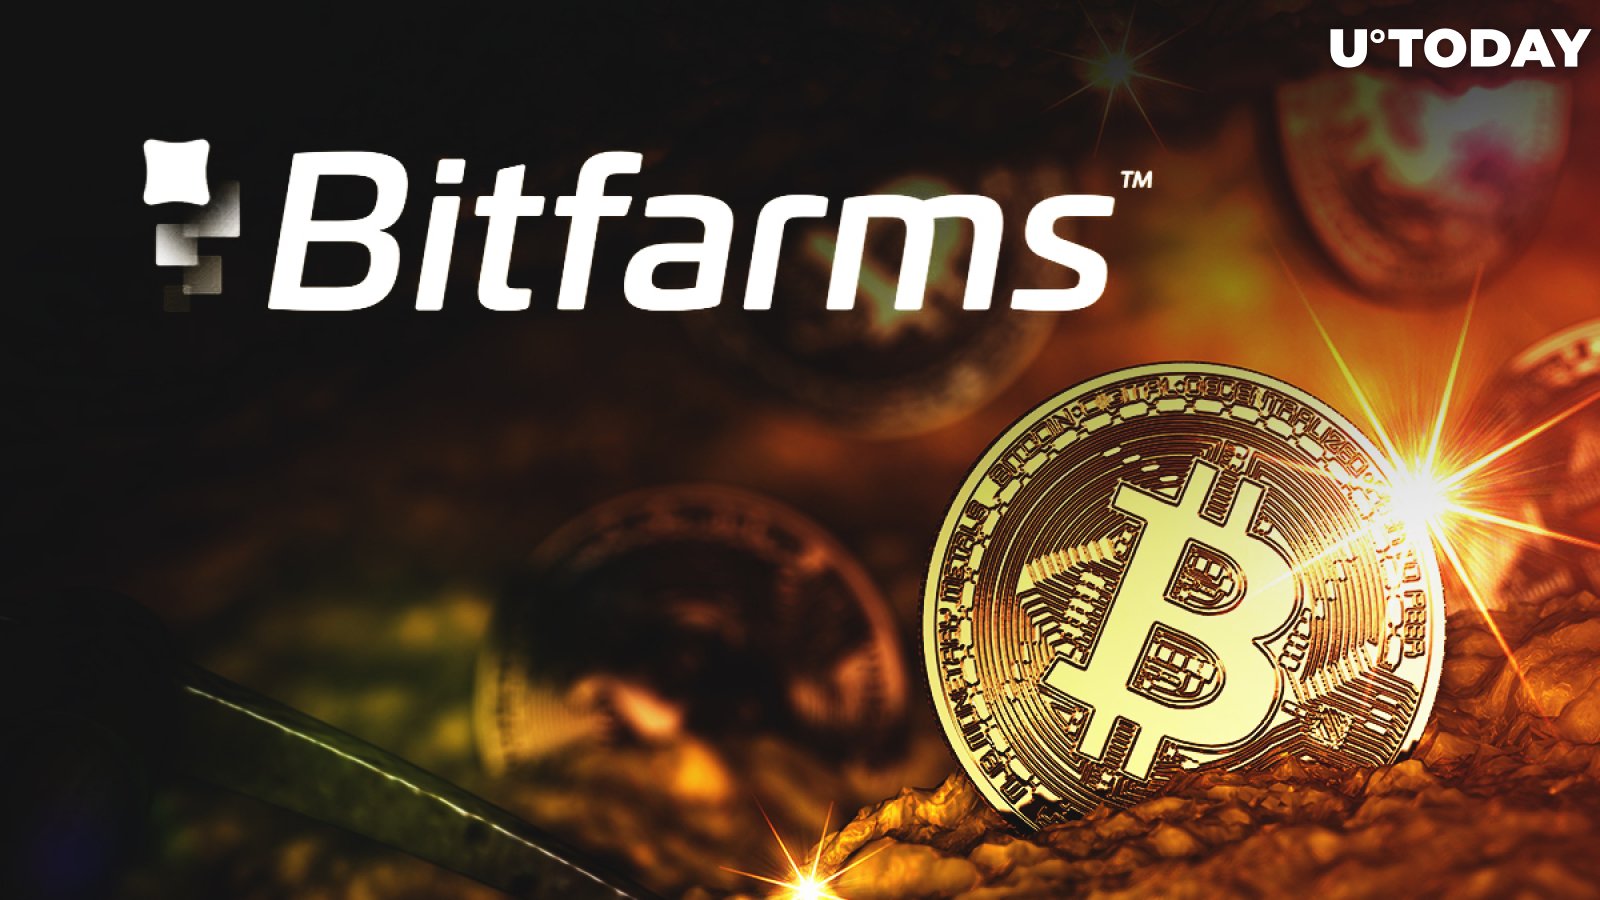 Here's How Many Bitcoins Bitfarms Mined in Q3